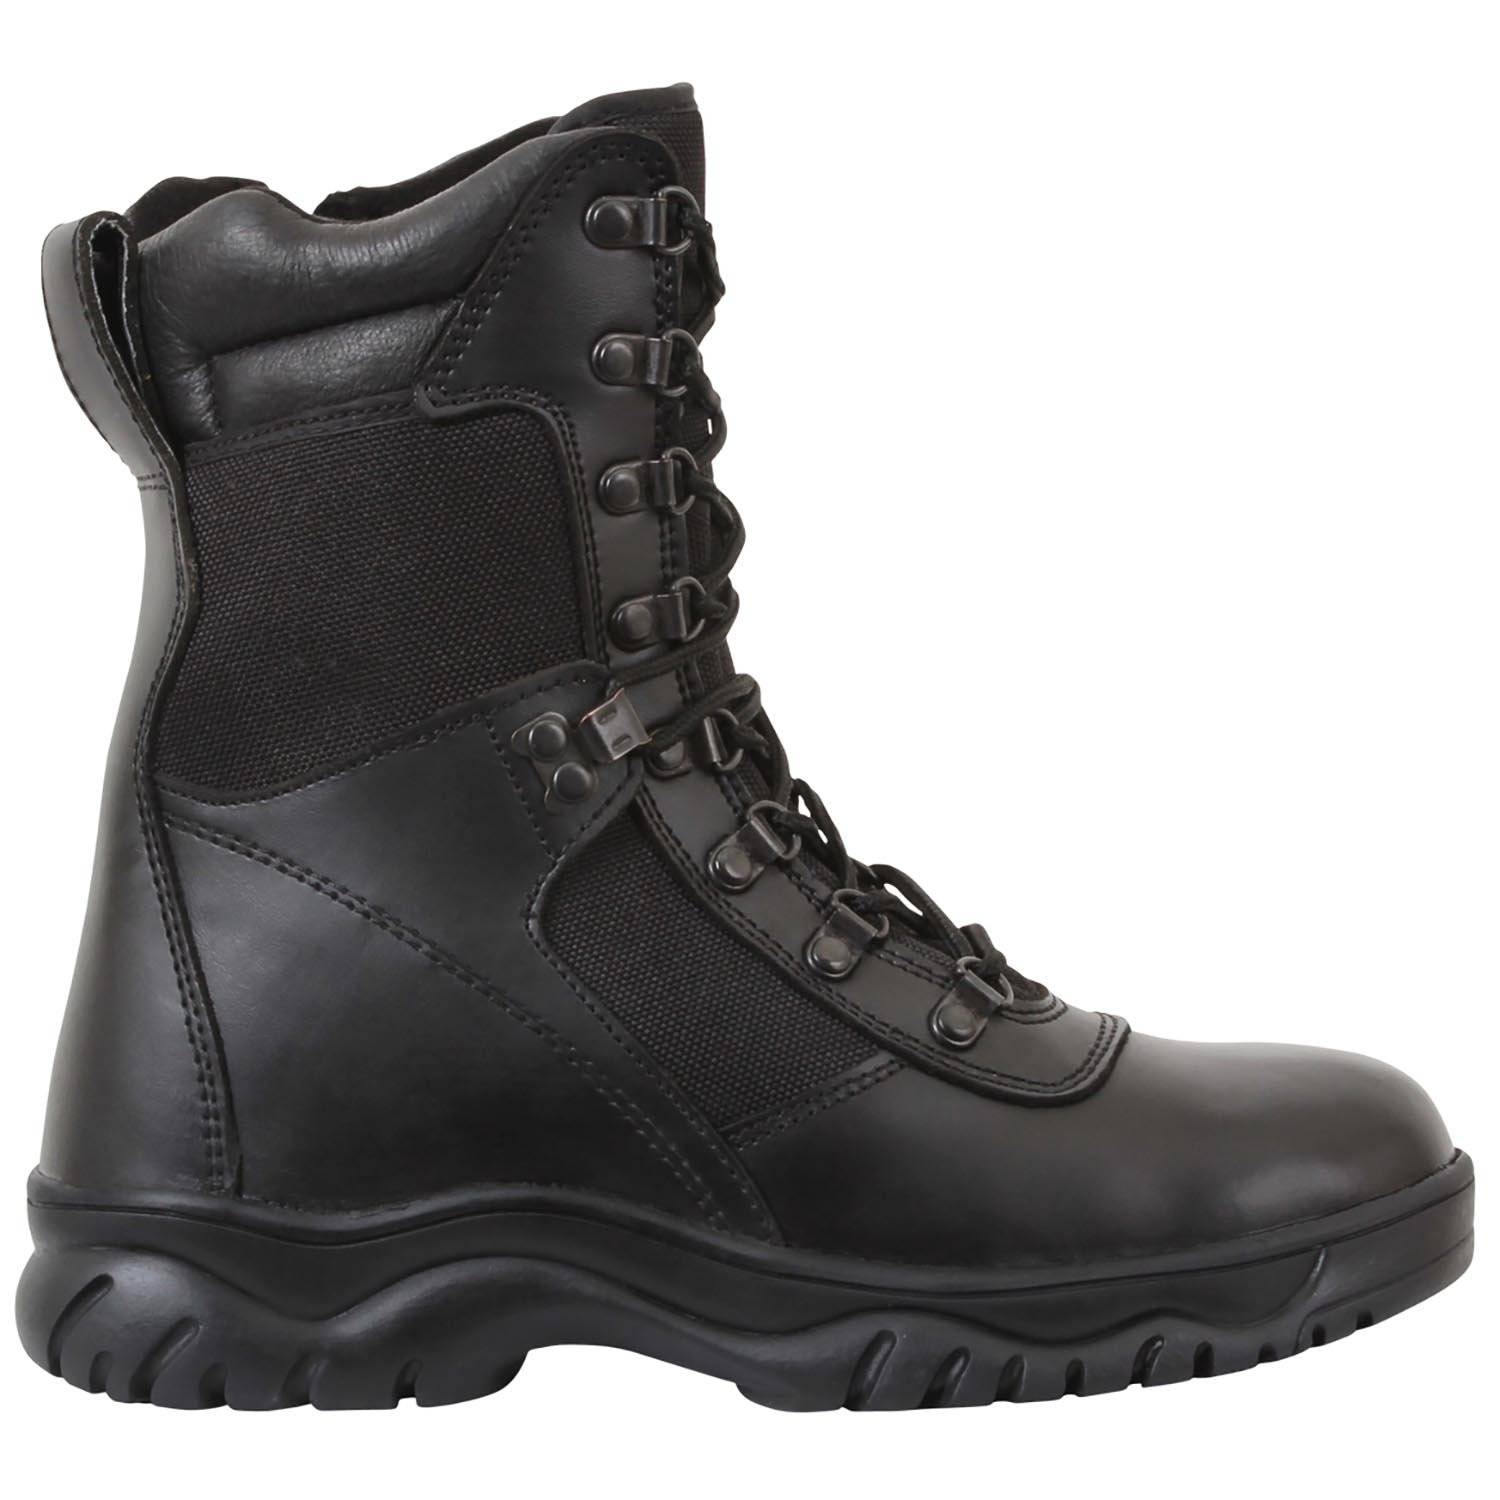 Rothco 8" Forced Entry Side Zip Tactical Boots